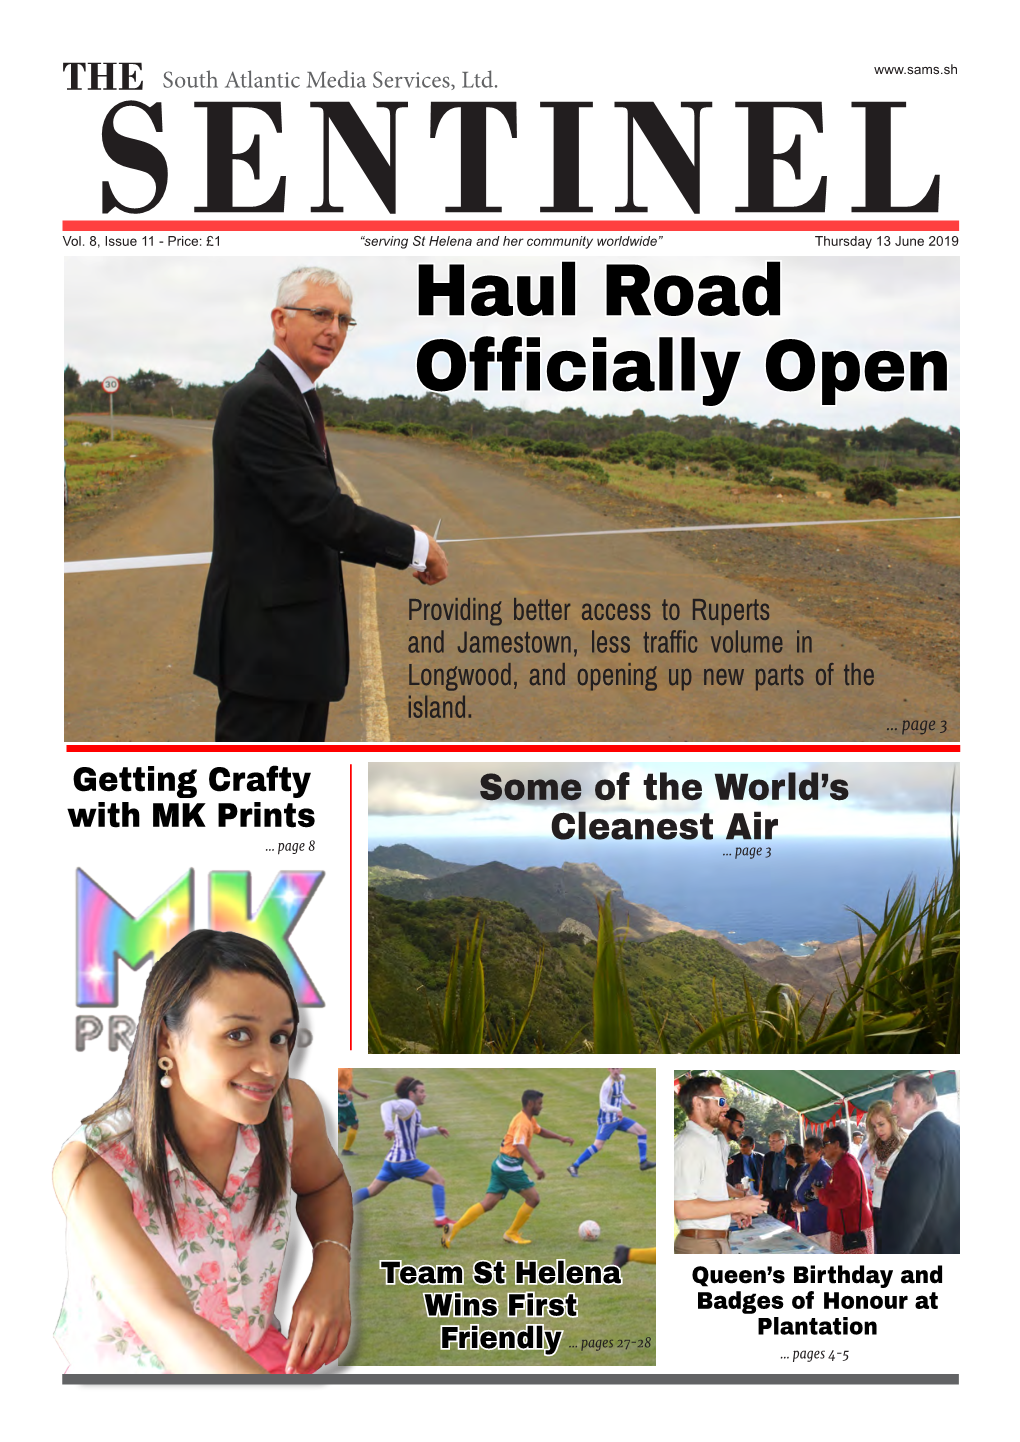 Haul Road Officially Open